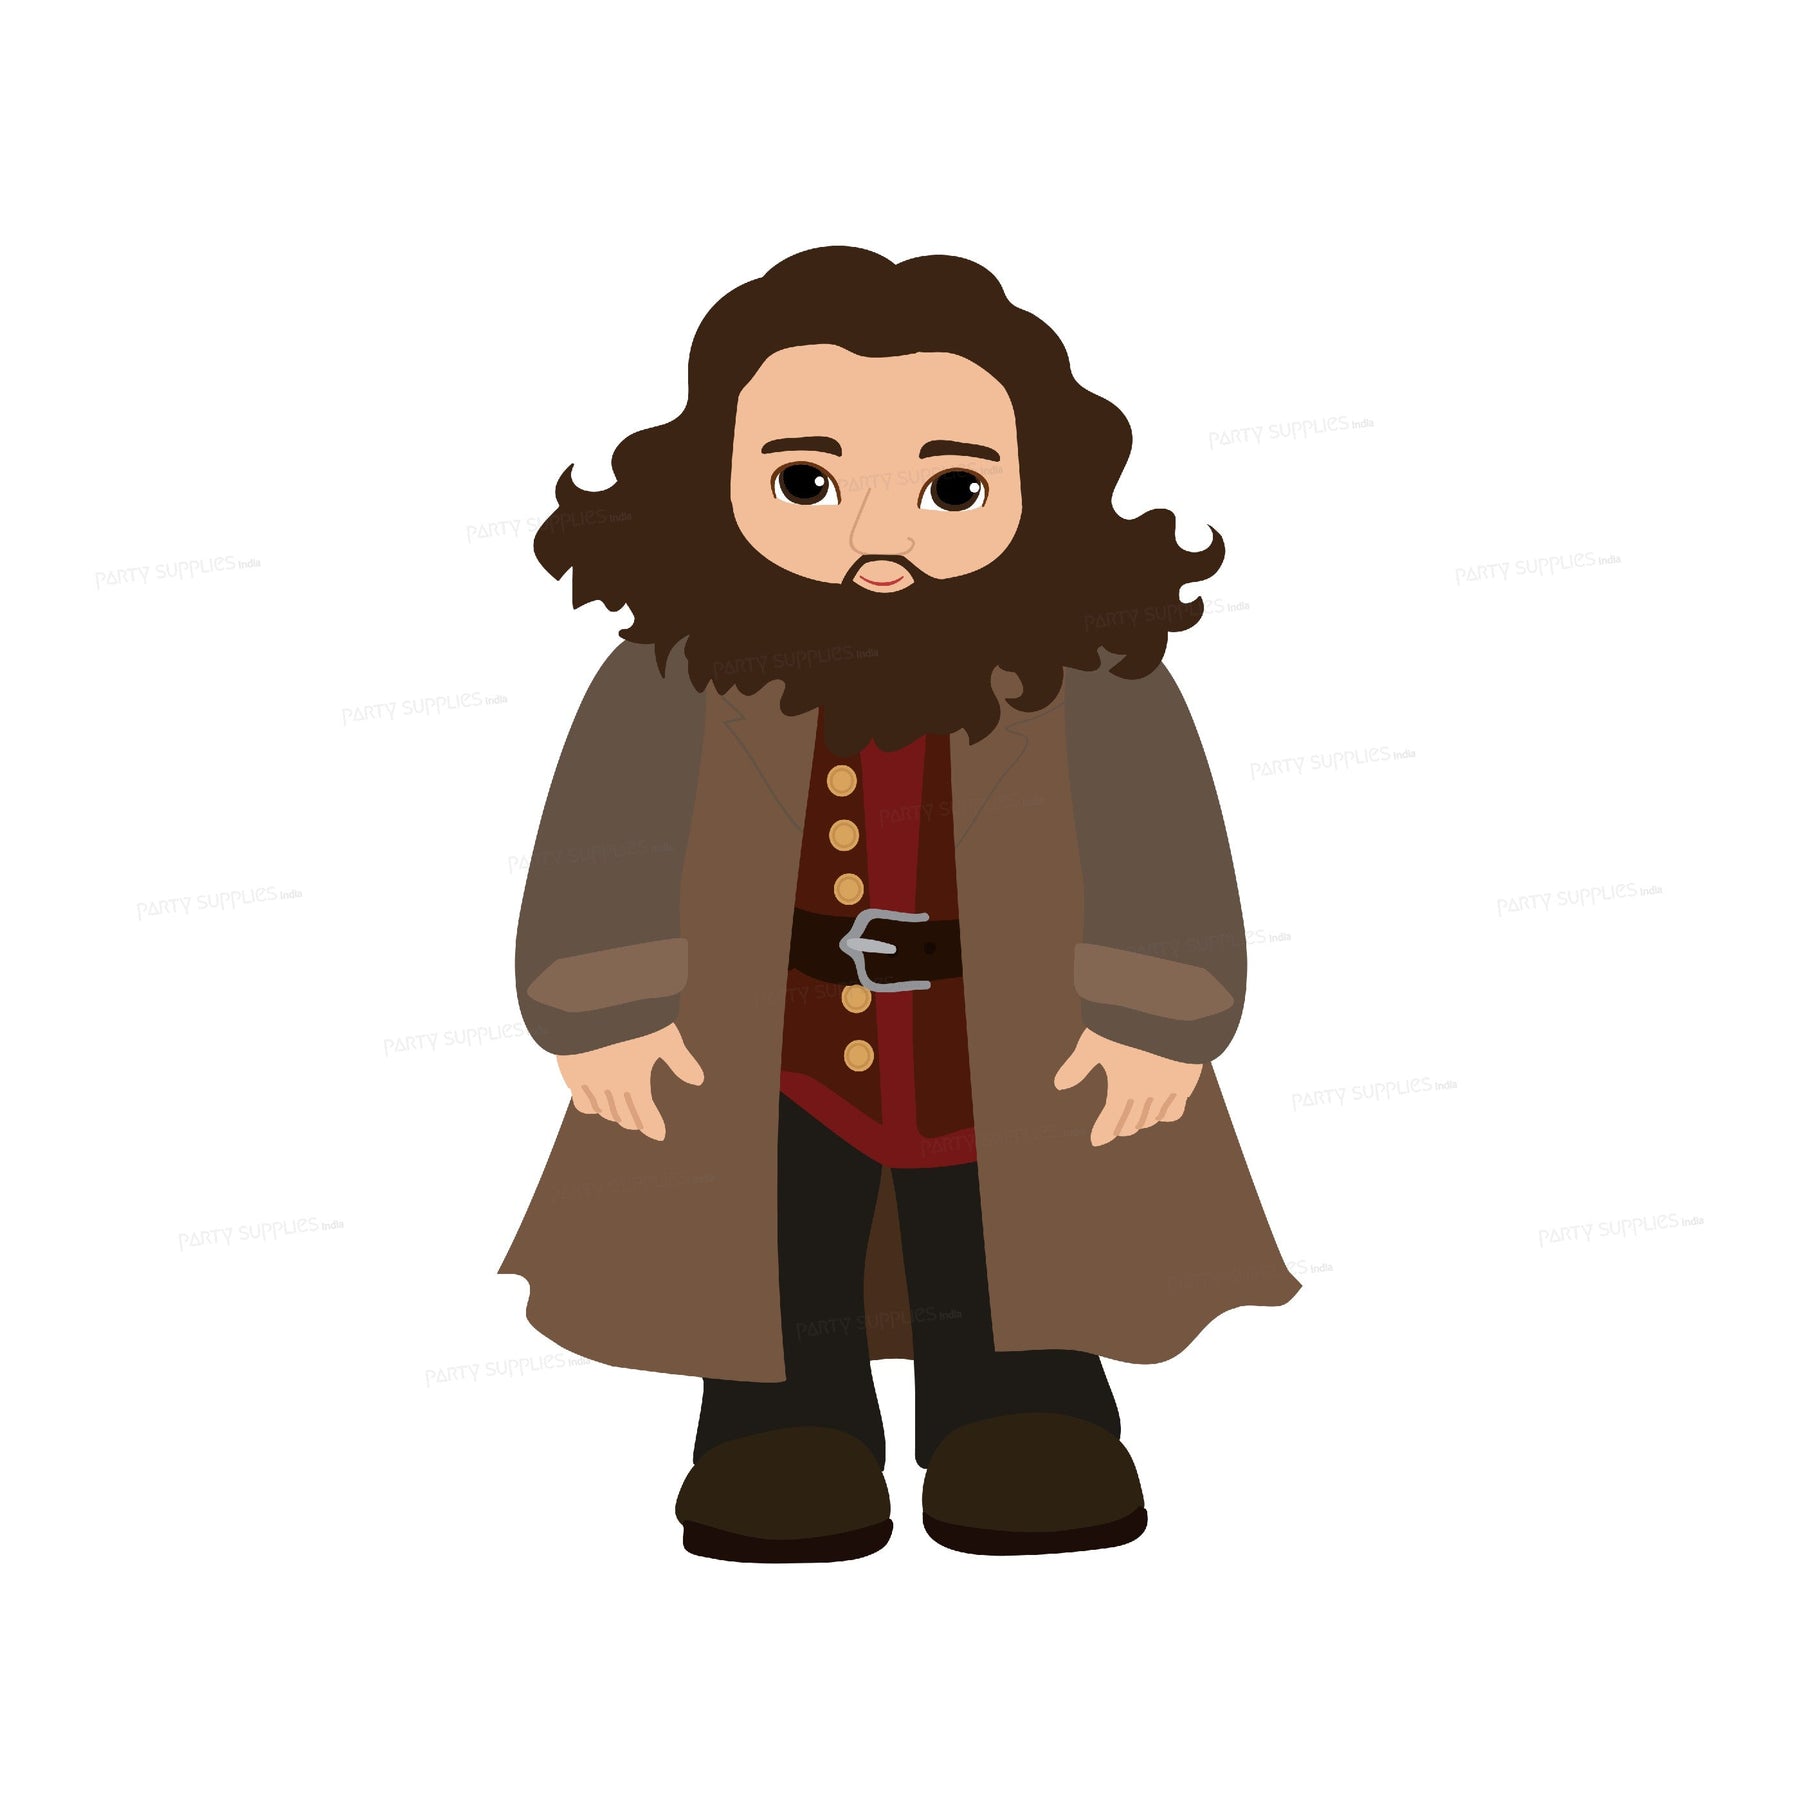 Hagrid Designs Themes Templates And Downloadable Graphic Clip Art Library